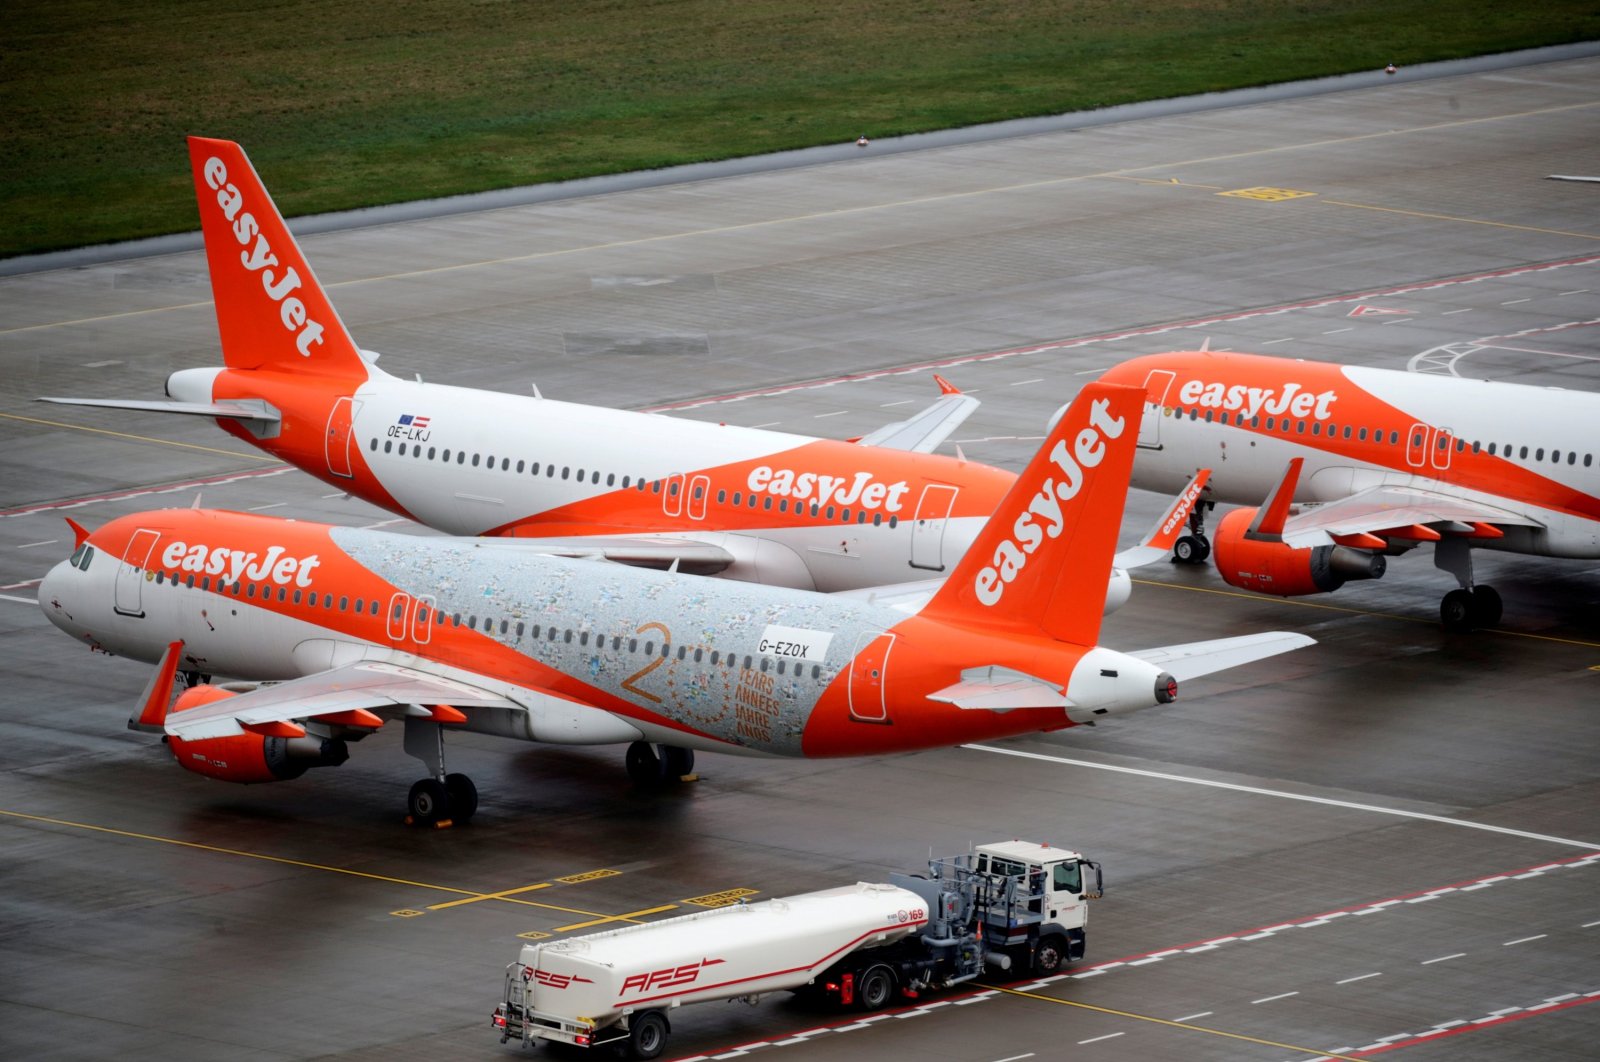 EasyJet airplanes are parked on the tarmac during the official opening of the new Berlin-Brandenburg Airport (BER) "Willy Brandt," in Schoenefeld near Berlin, Germany, Oct. 31, 2020. (Reuters Photo)